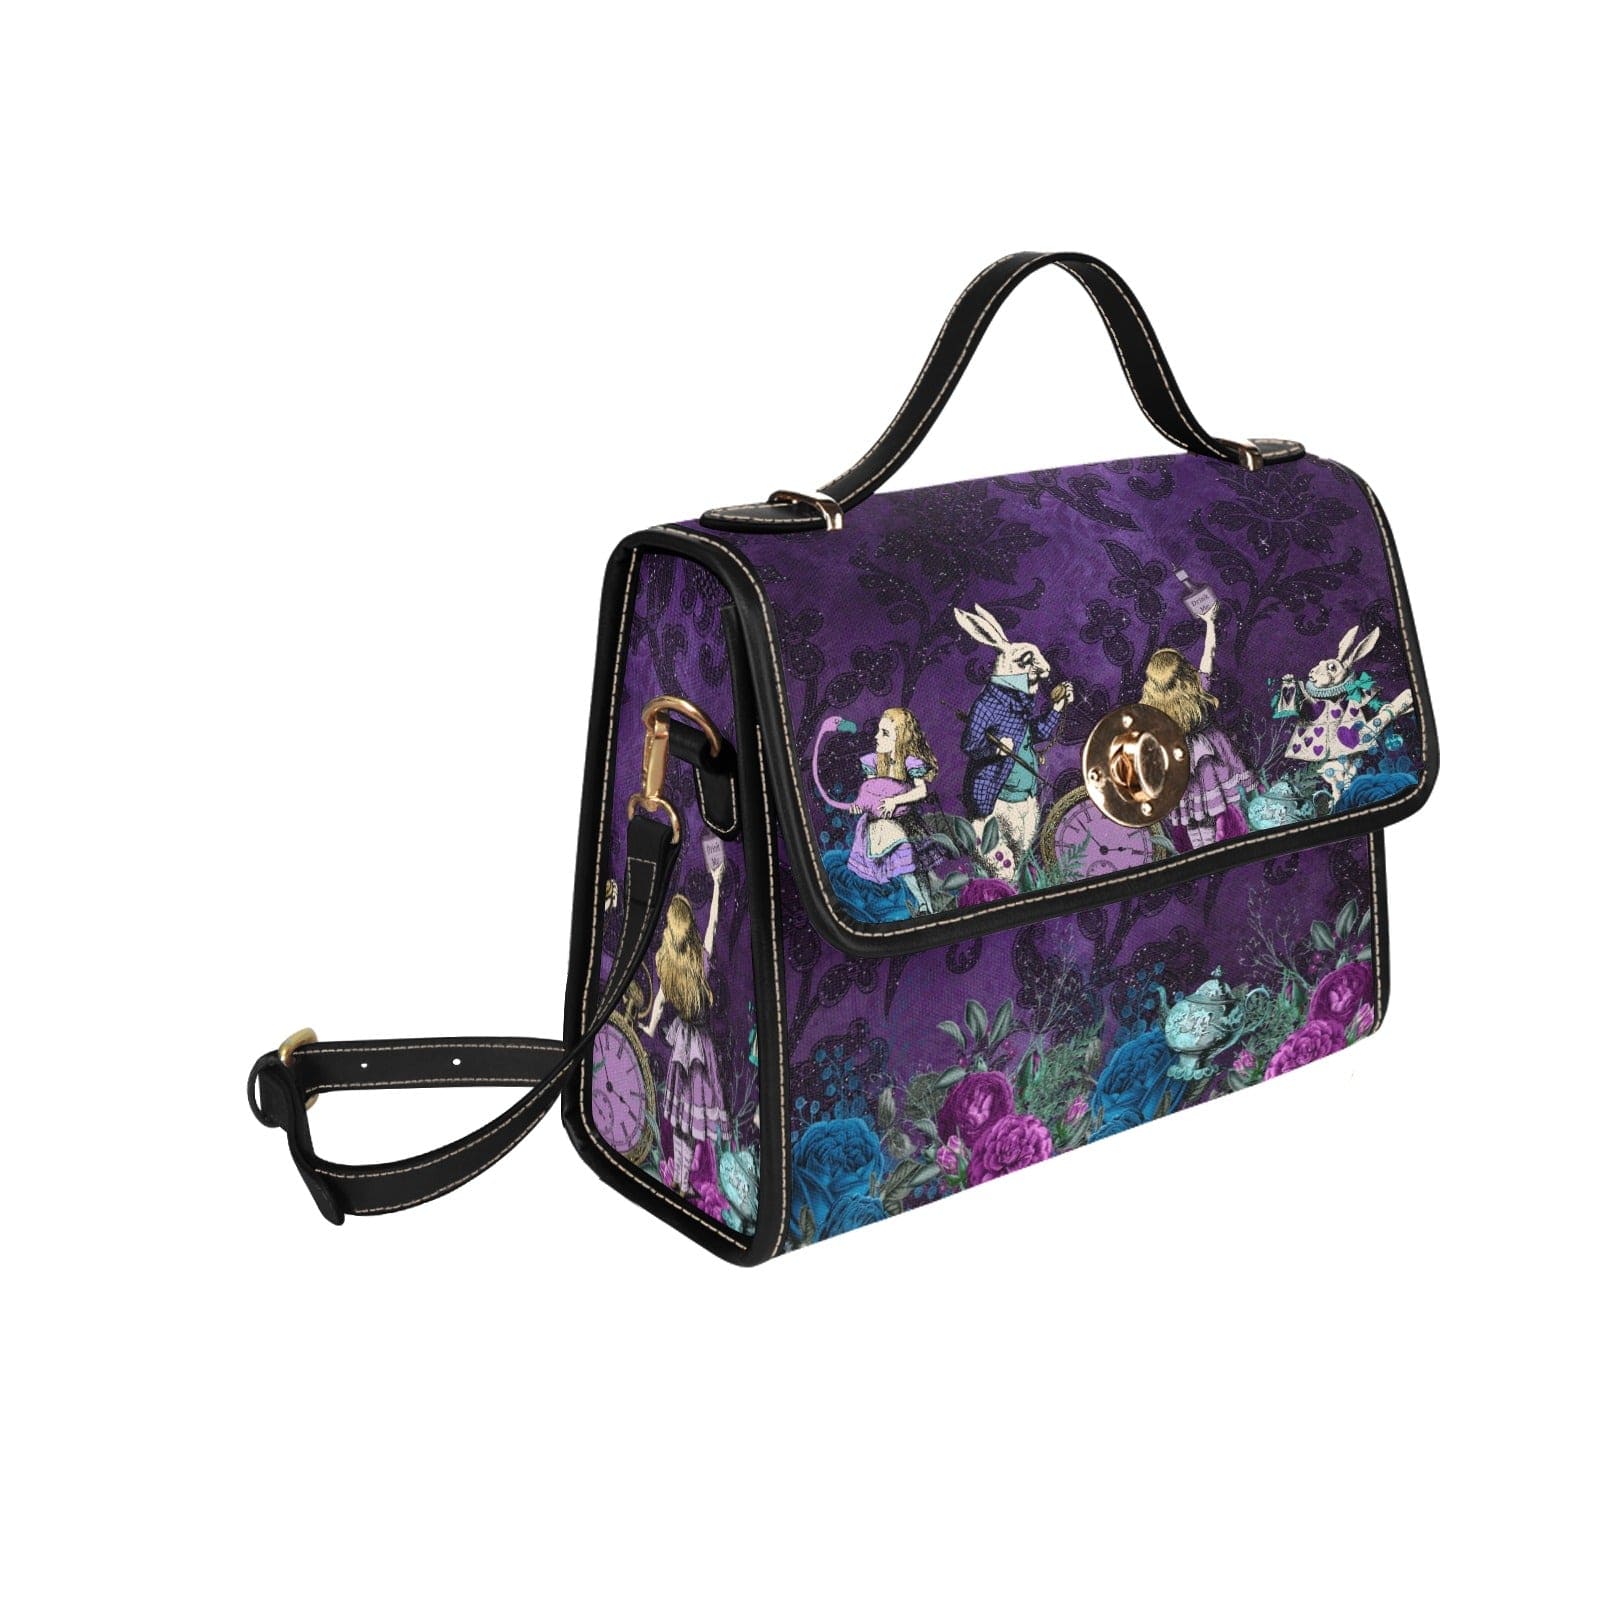 side front view of the Purple damask background on an Alice in wonderland themed gothic satchel handbag featuring the White Rabbit at Gallery Serpentine